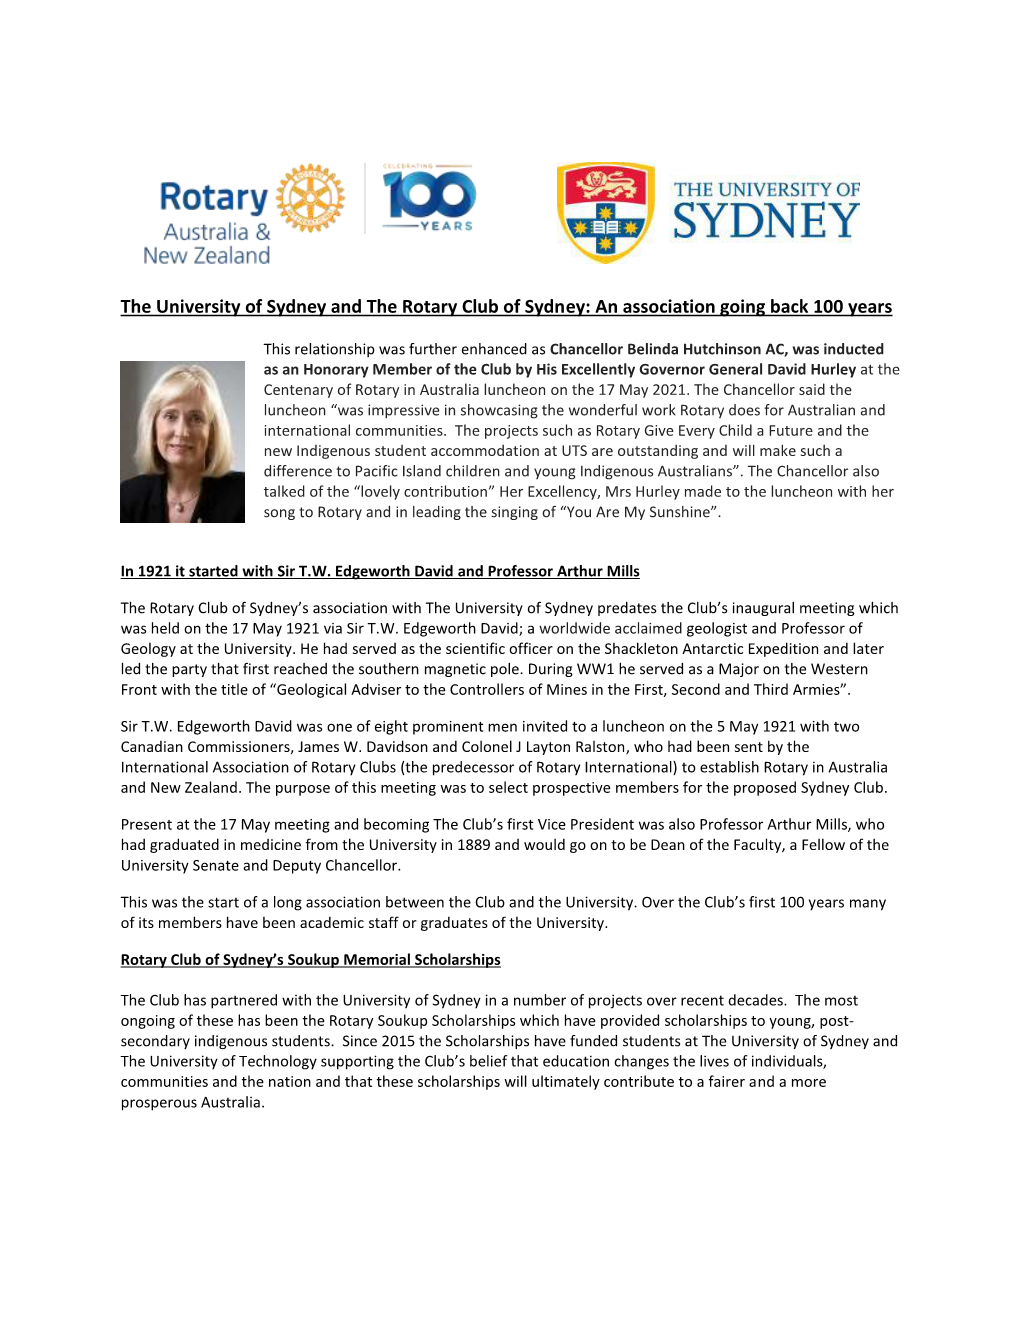 The University of Sydney and the Rotary Club of Sydney: an Association Going Back 100 Years